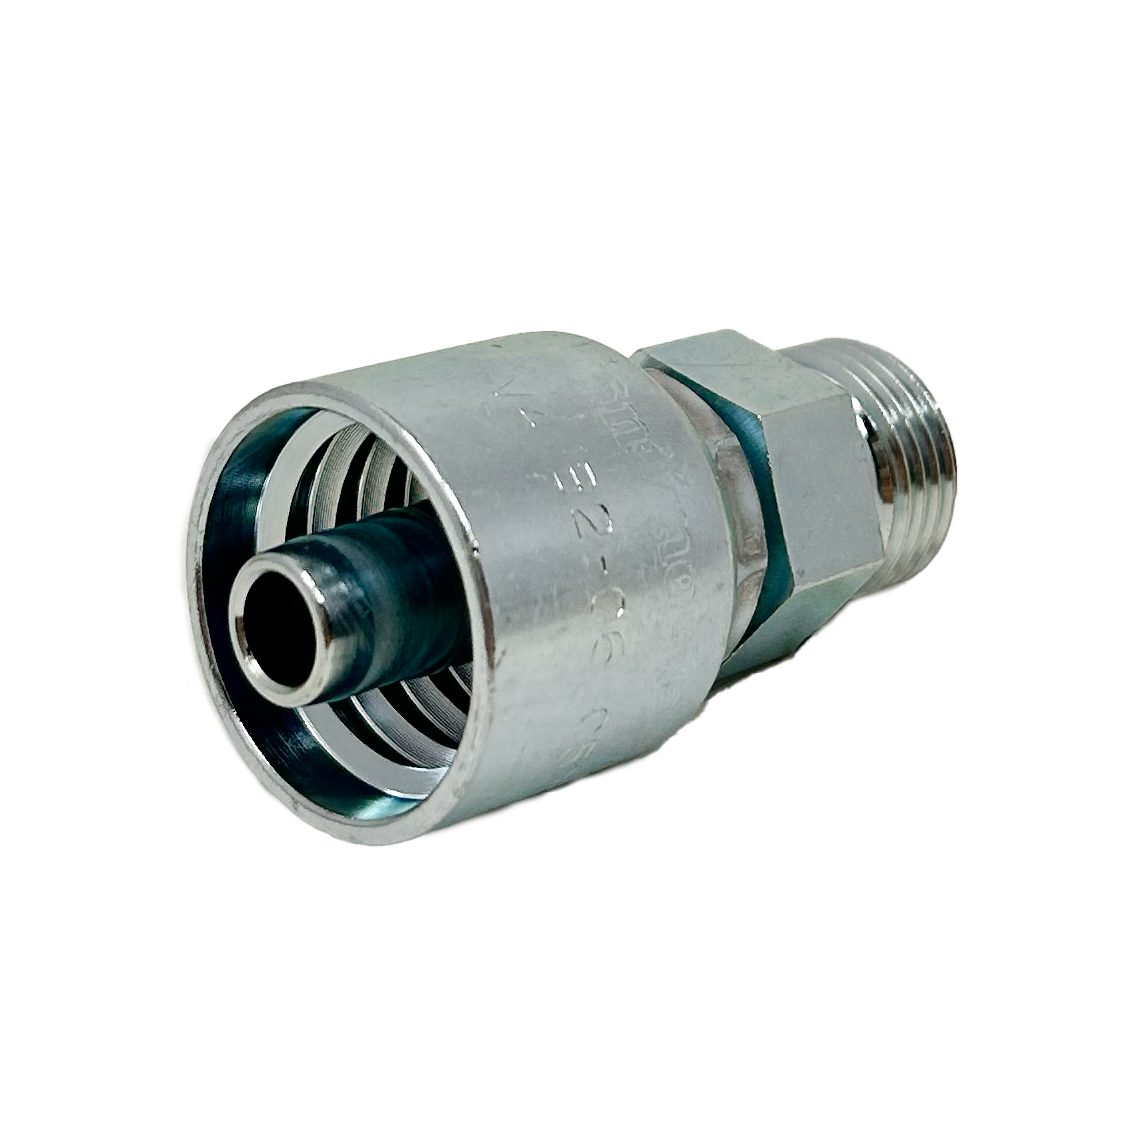 B2-OFM-0608: Continental Hose Fitting, 0.375 (3/8") Hose ID x 13/16-16 Male ORFS, Straight Rigid Connection